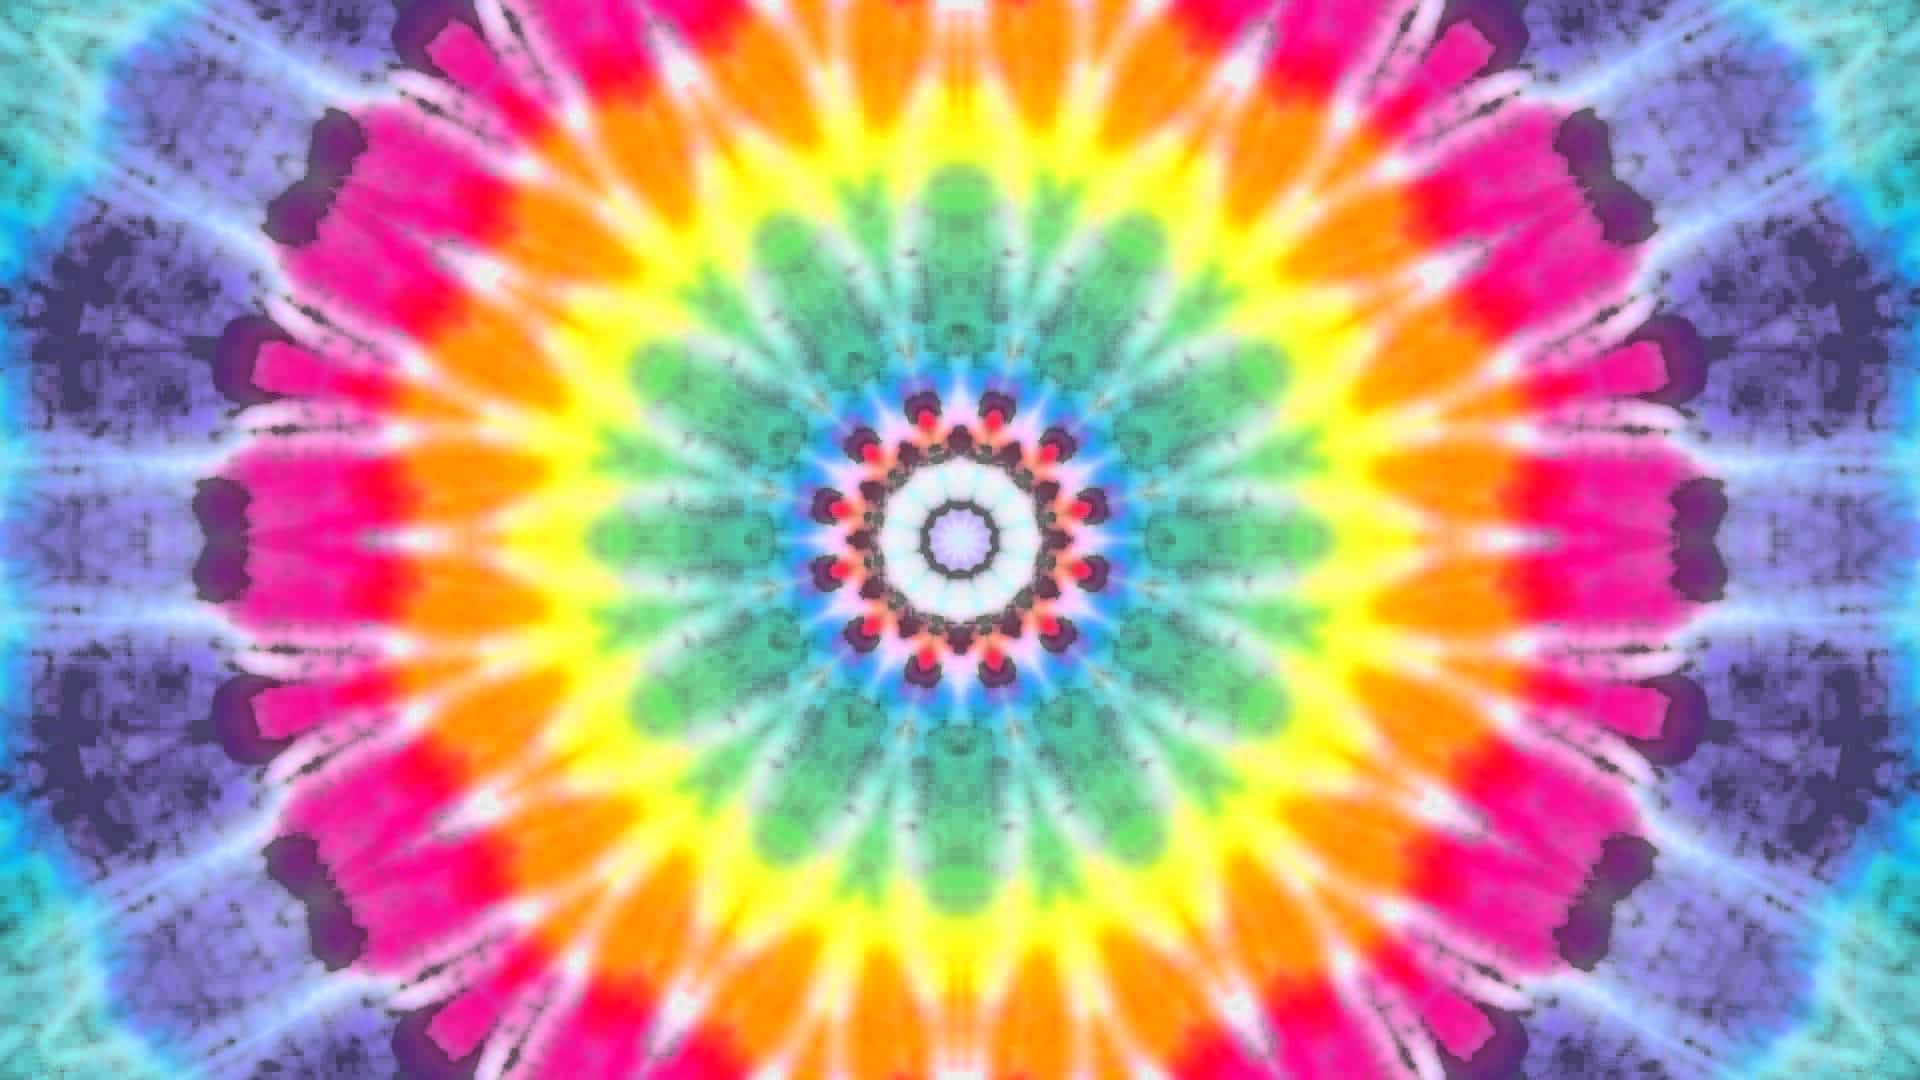 Unlock your fashion creativity with this stunning pastel tie dye pattern." Wallpaper